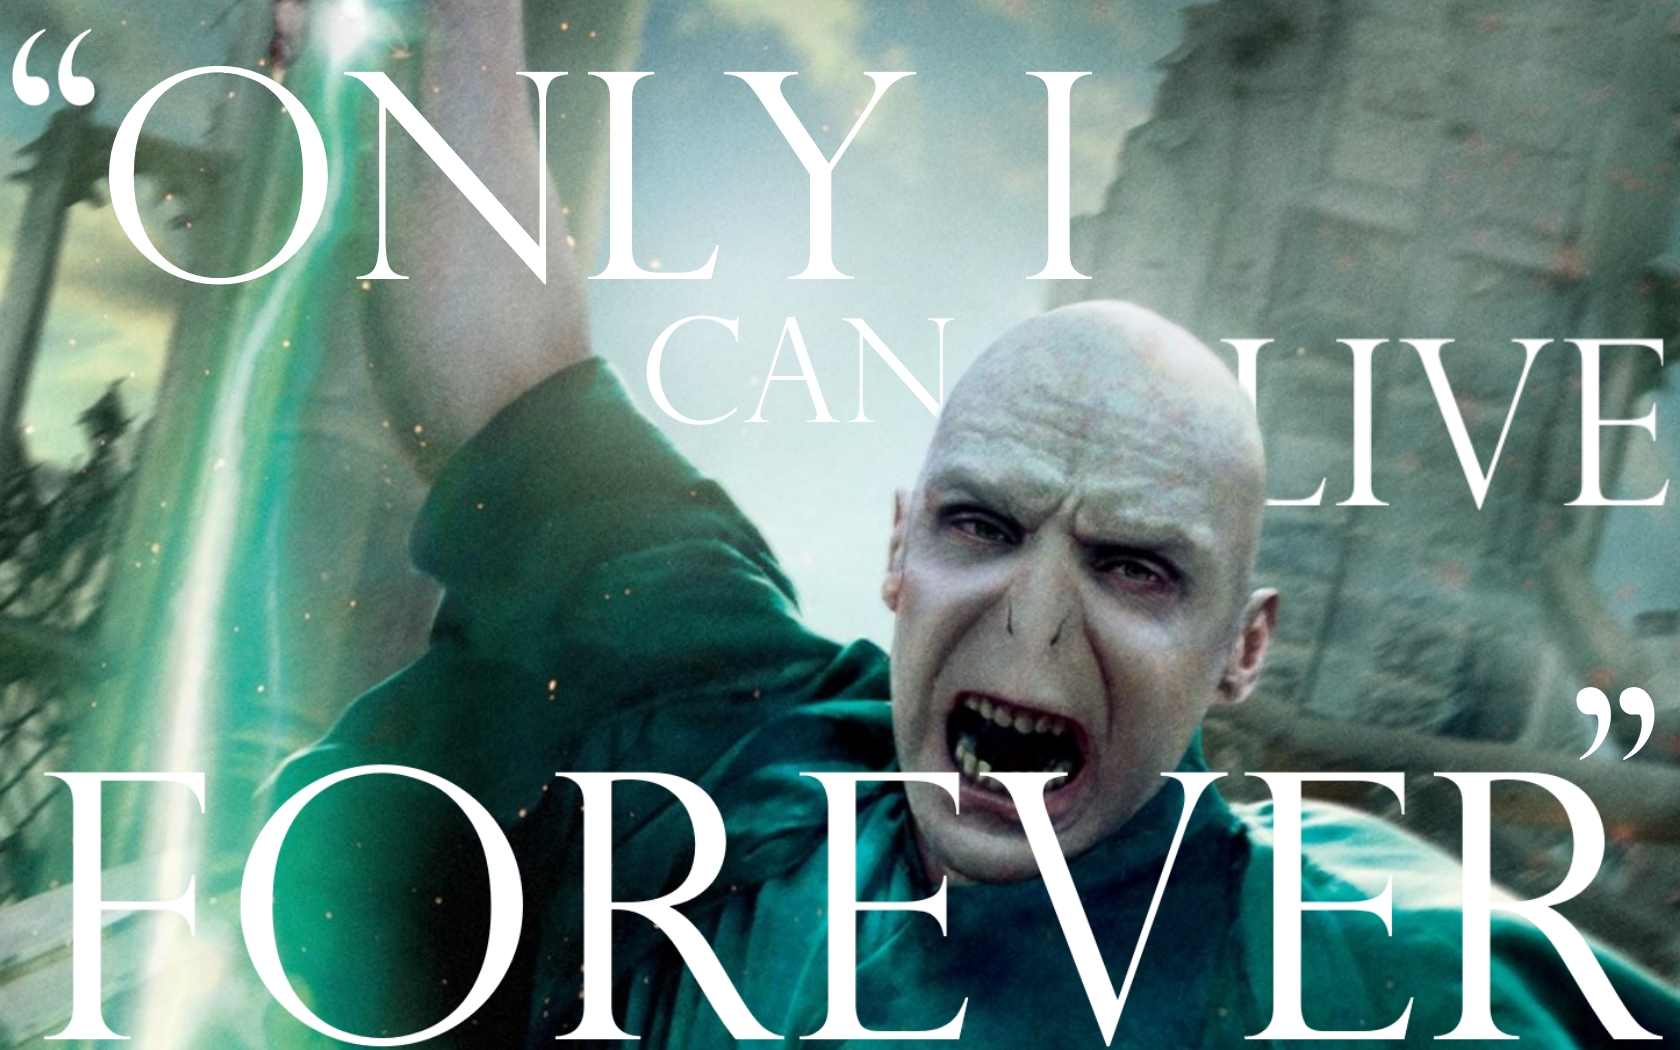 Harry Potter And The Deathly Hallows Part 2 Harry Potter And The Deathly Hallows Lord Voldemort Quot 1680x1050